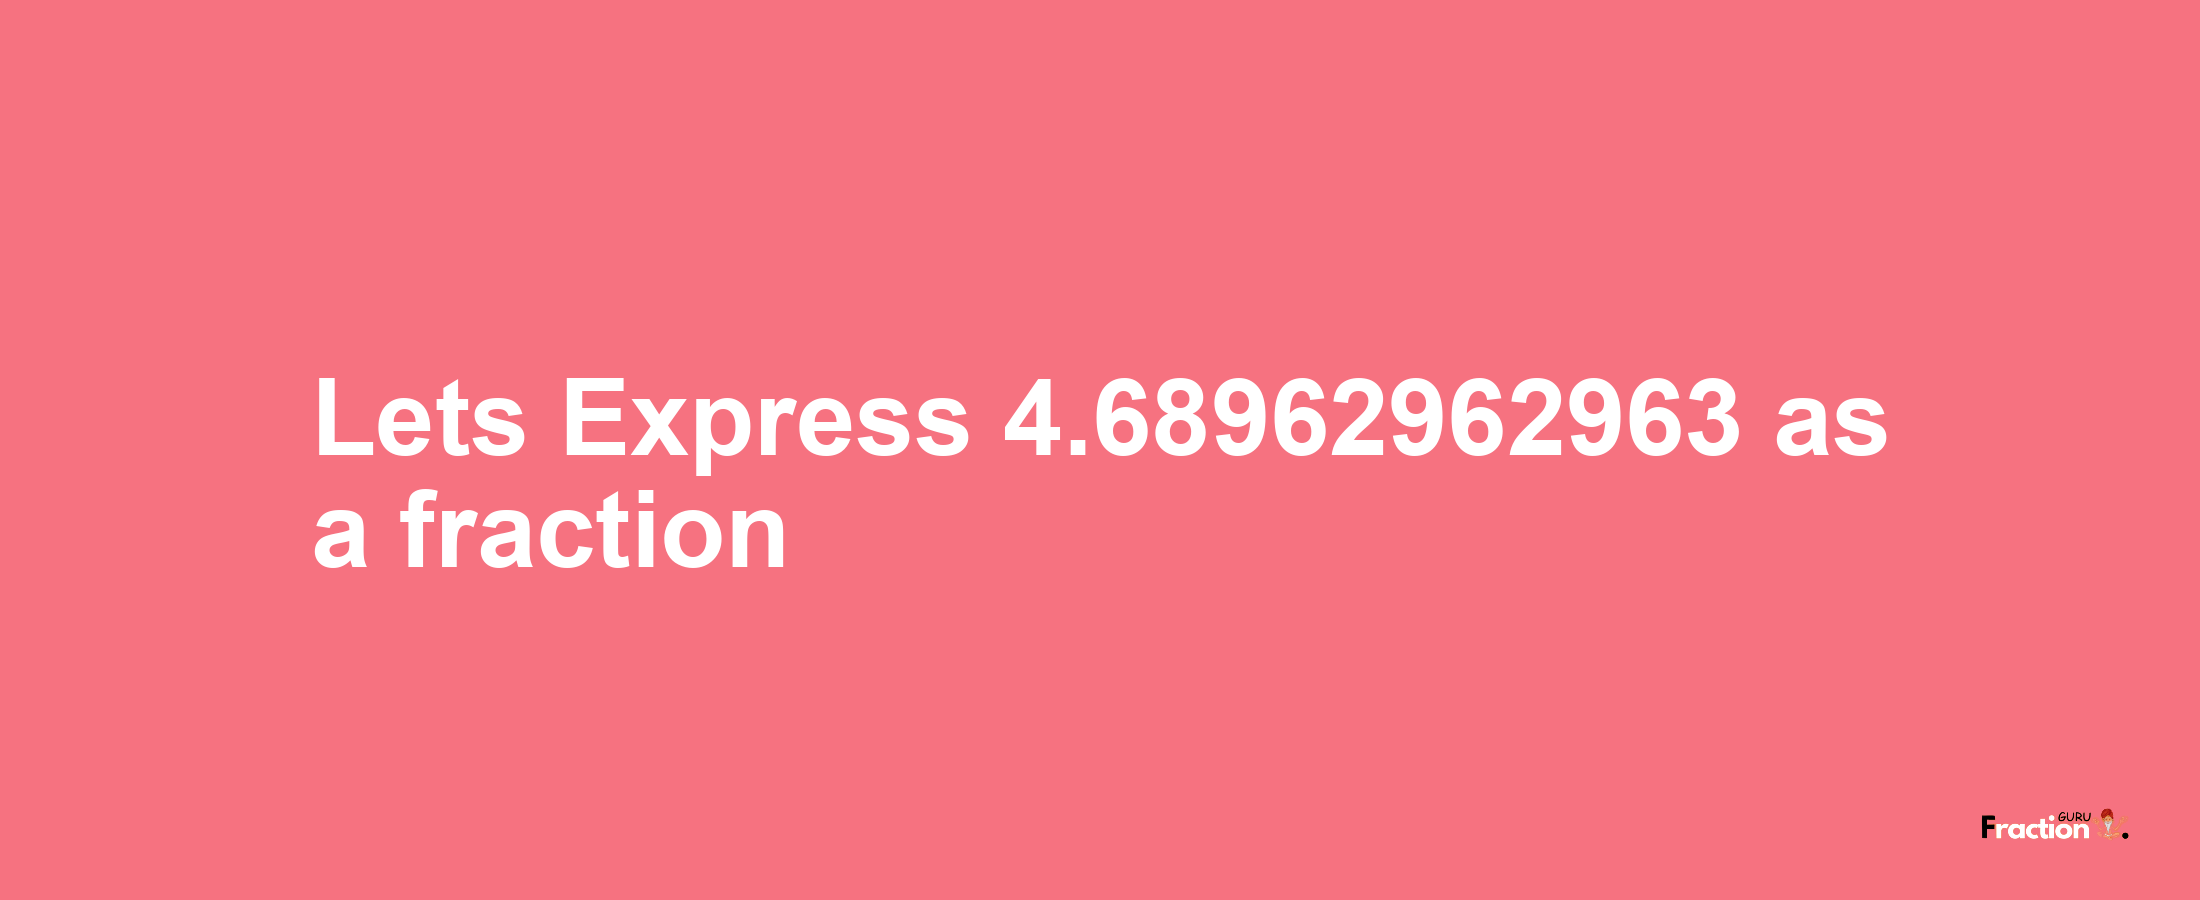 Lets Express 4.68962962963 as afraction